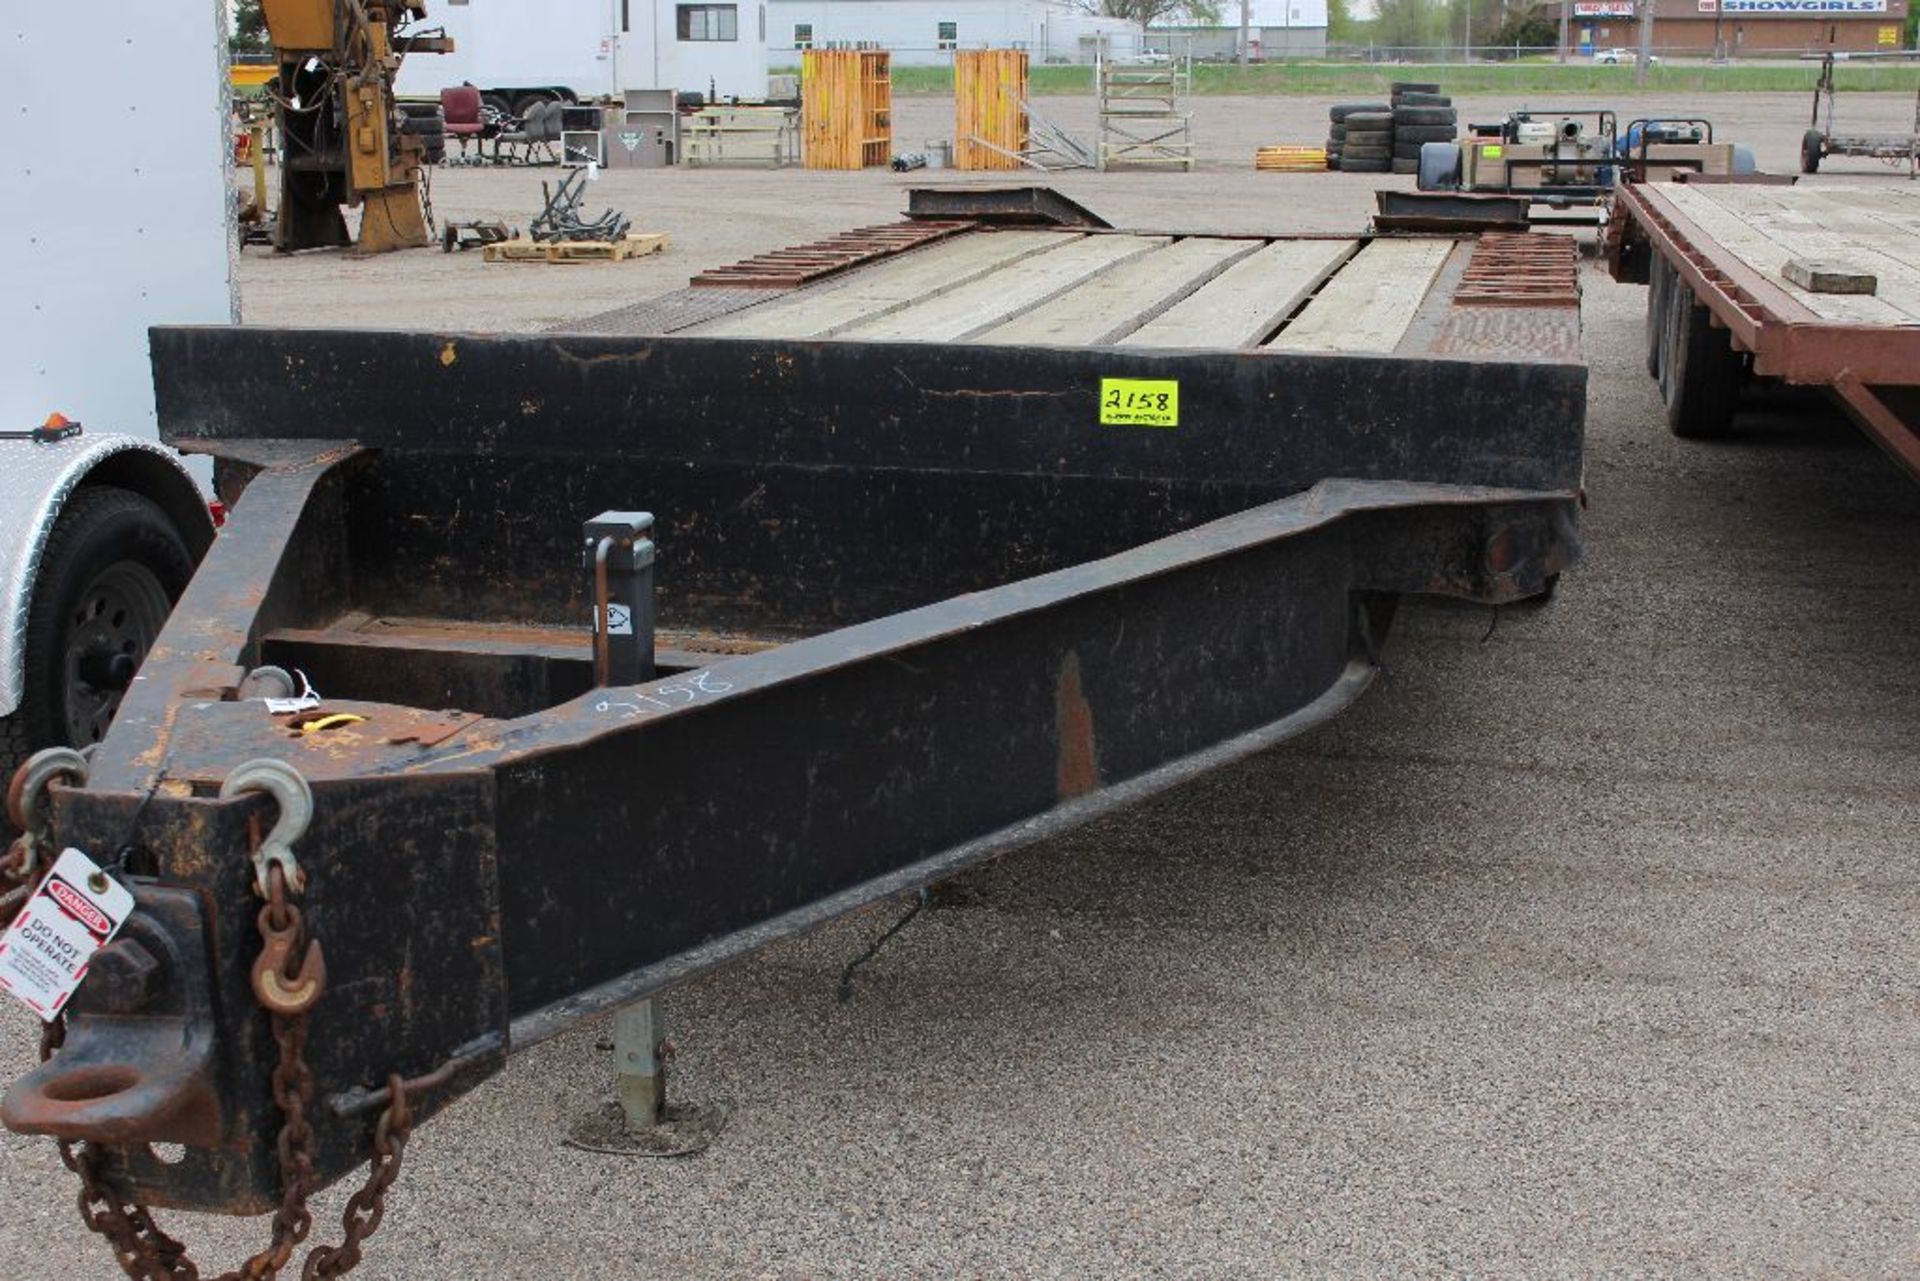 Pentel hitch, 3 axle trailer, w/ramps, 20ft bed. - Image 3 of 3